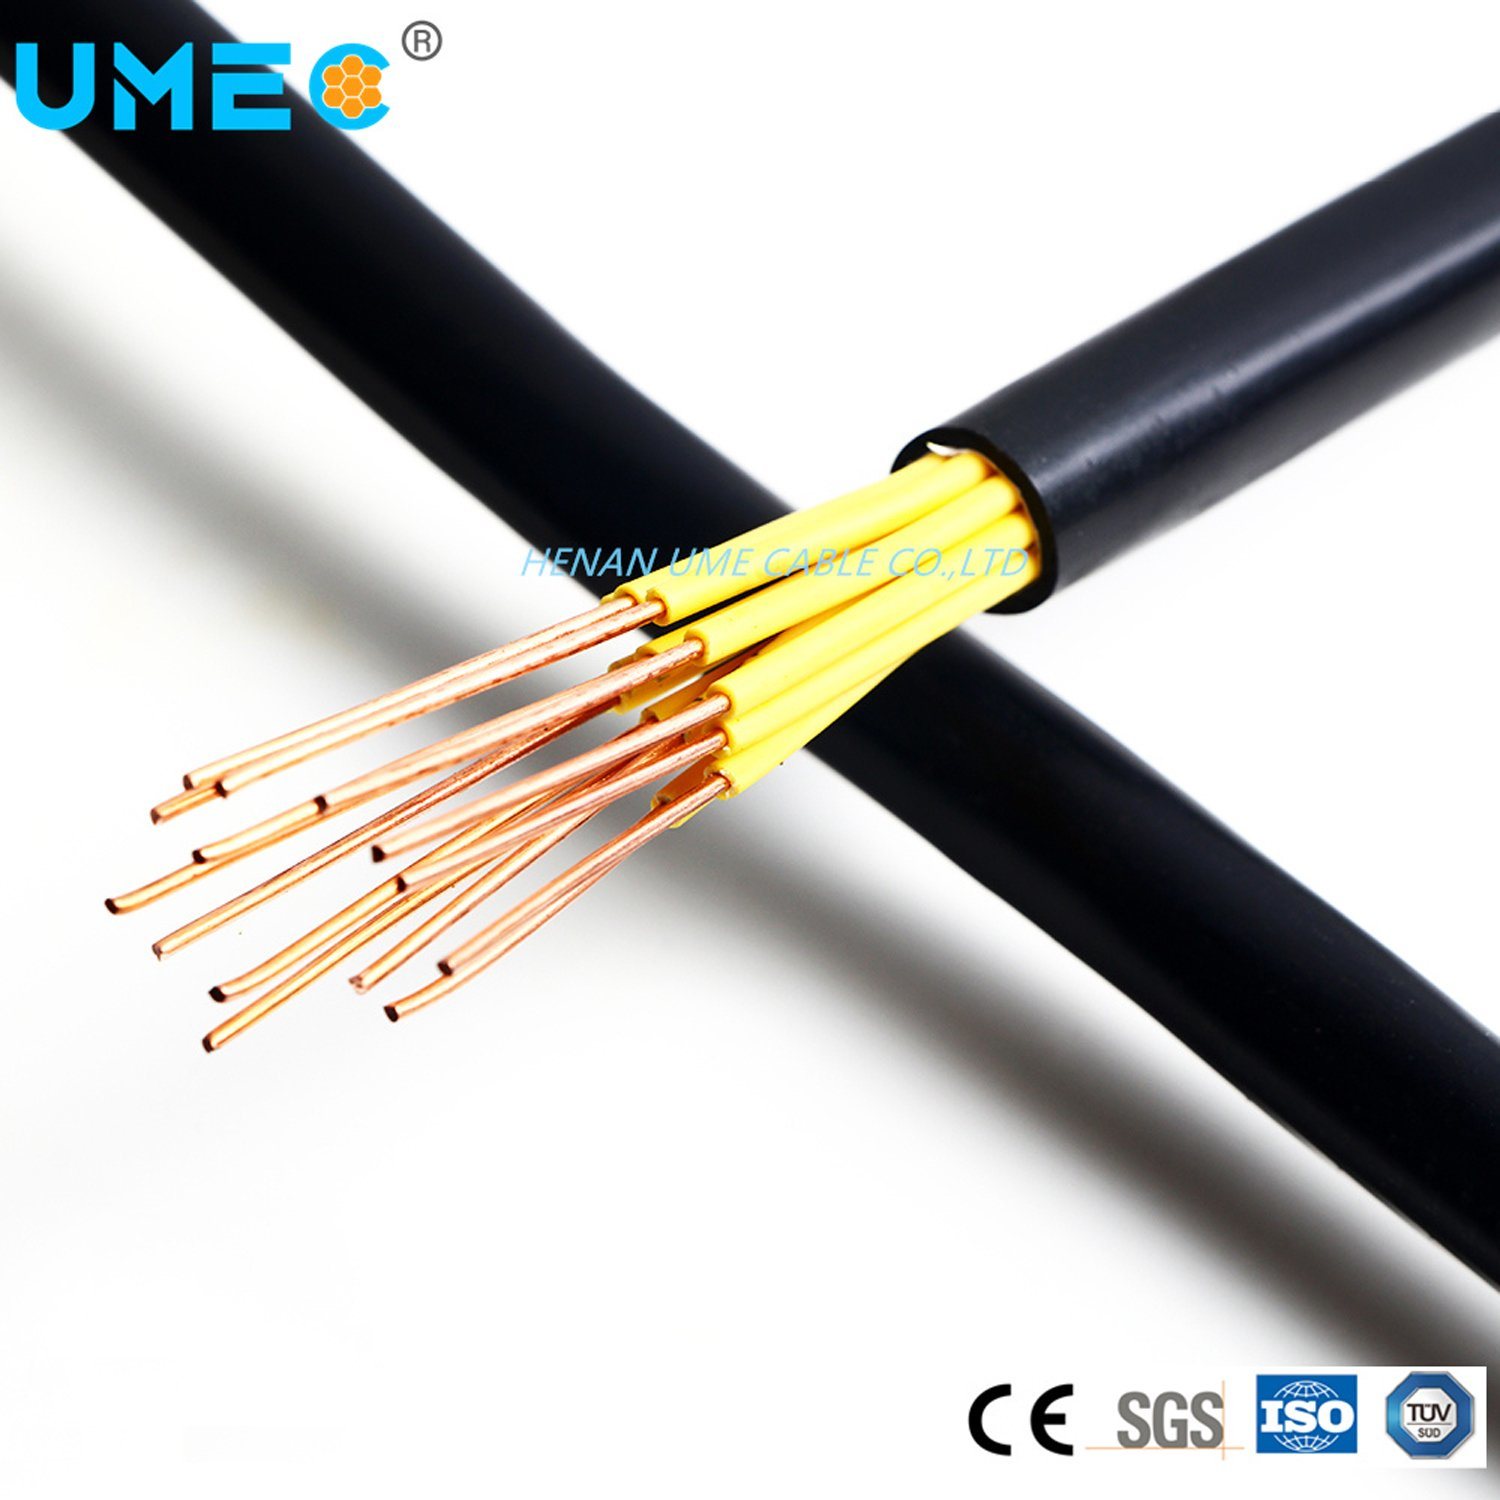 Class1 Solid Conductor Stranded Conductor Class2 Copper Conductor Control Cable Low Voltage 12 Wire 12*0.5mm 4*4mm 18*1.5mm Electric Control Cable